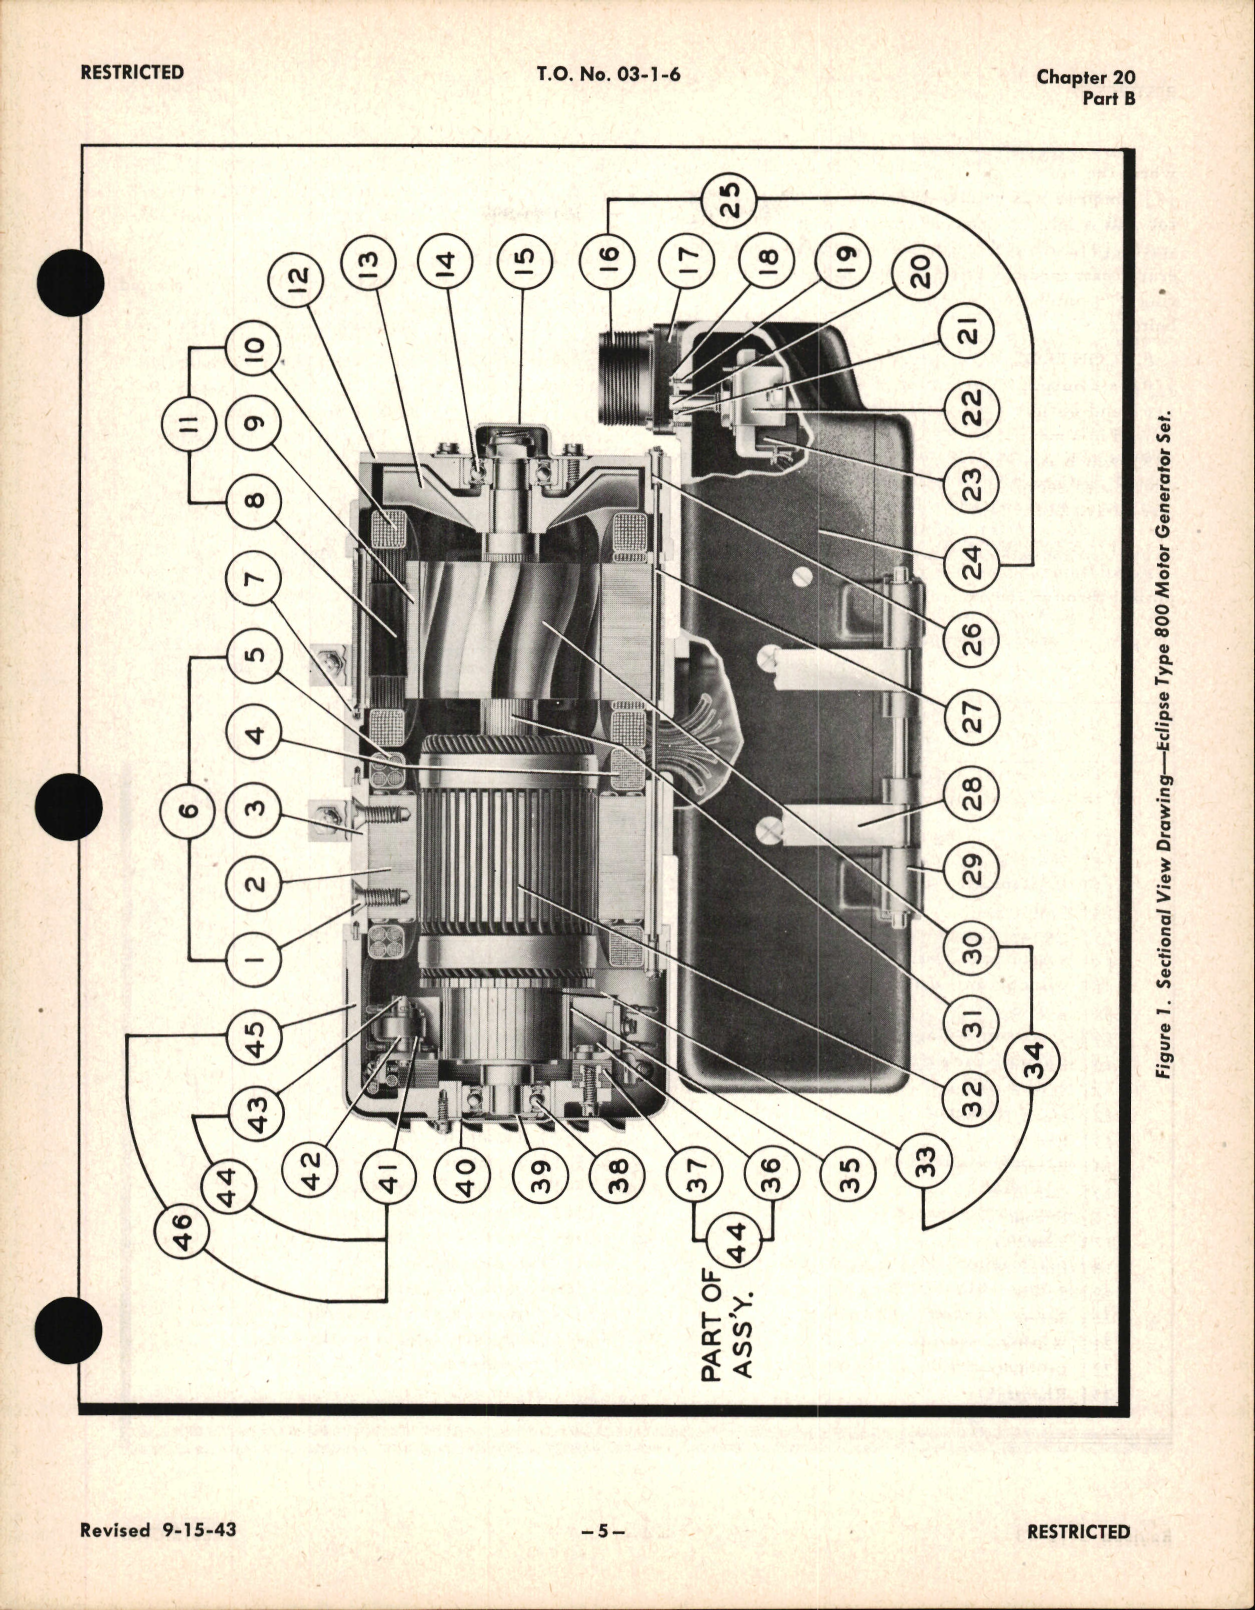 Sample page 5 from AirCorps Library document: Overhaul Instructions for Type 800 Motor Generator and Control Box